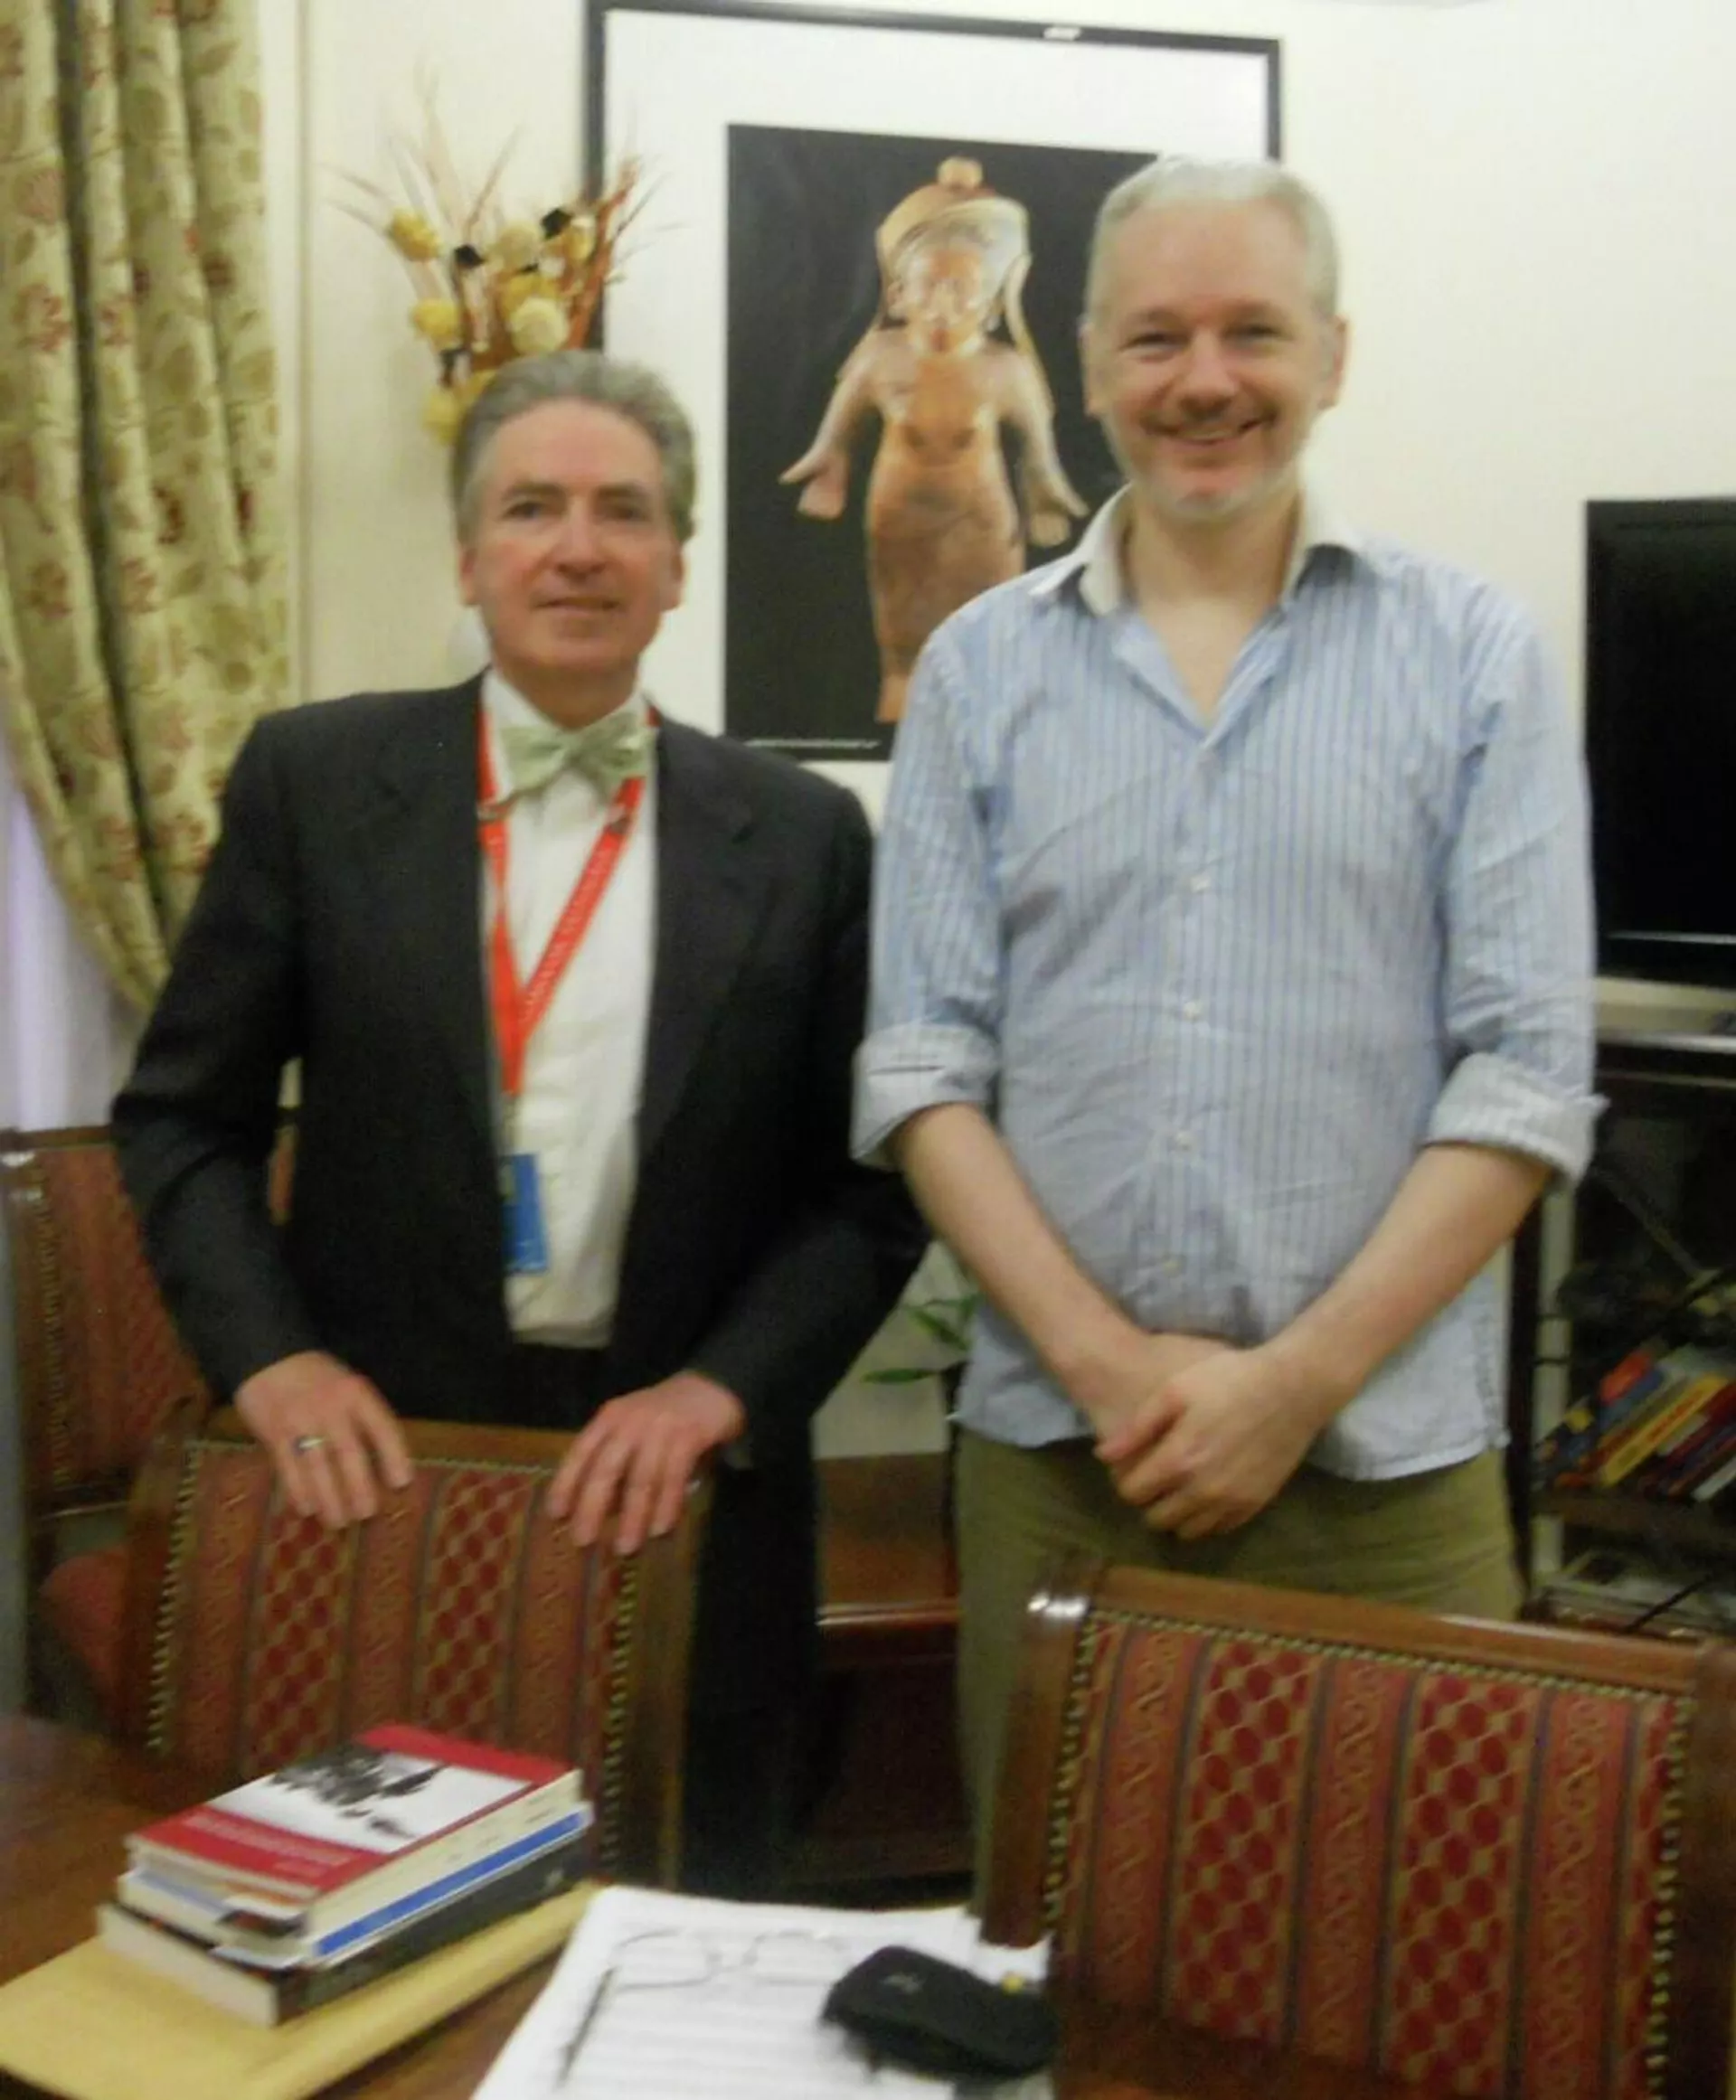 UN Independent Expert on the Promotion of a Democratic and Equitable International Order Alfred de Zayas with Julian Assange at the Ecuadorian Embassy in London in April 2015. - Sputnik International, 1920, 21.02.2024